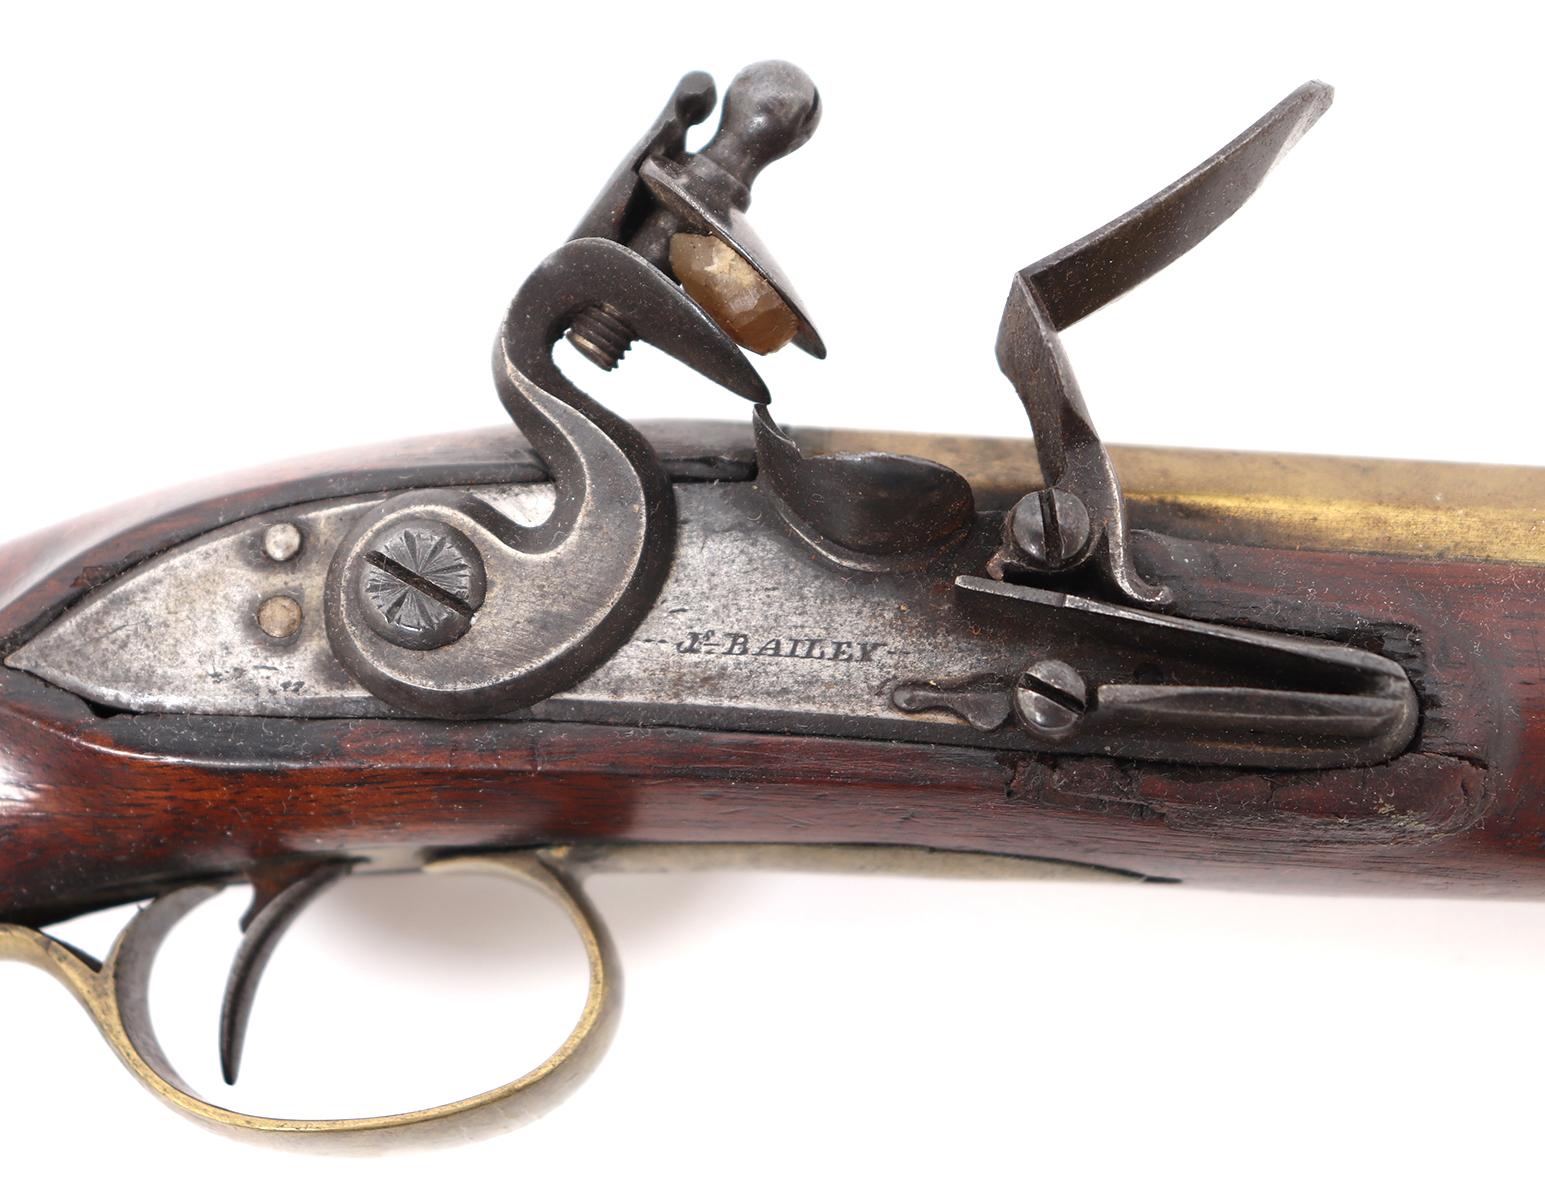 Cased Pair of English Brass Barrel Pistols, by J. Bailey circa. 1770